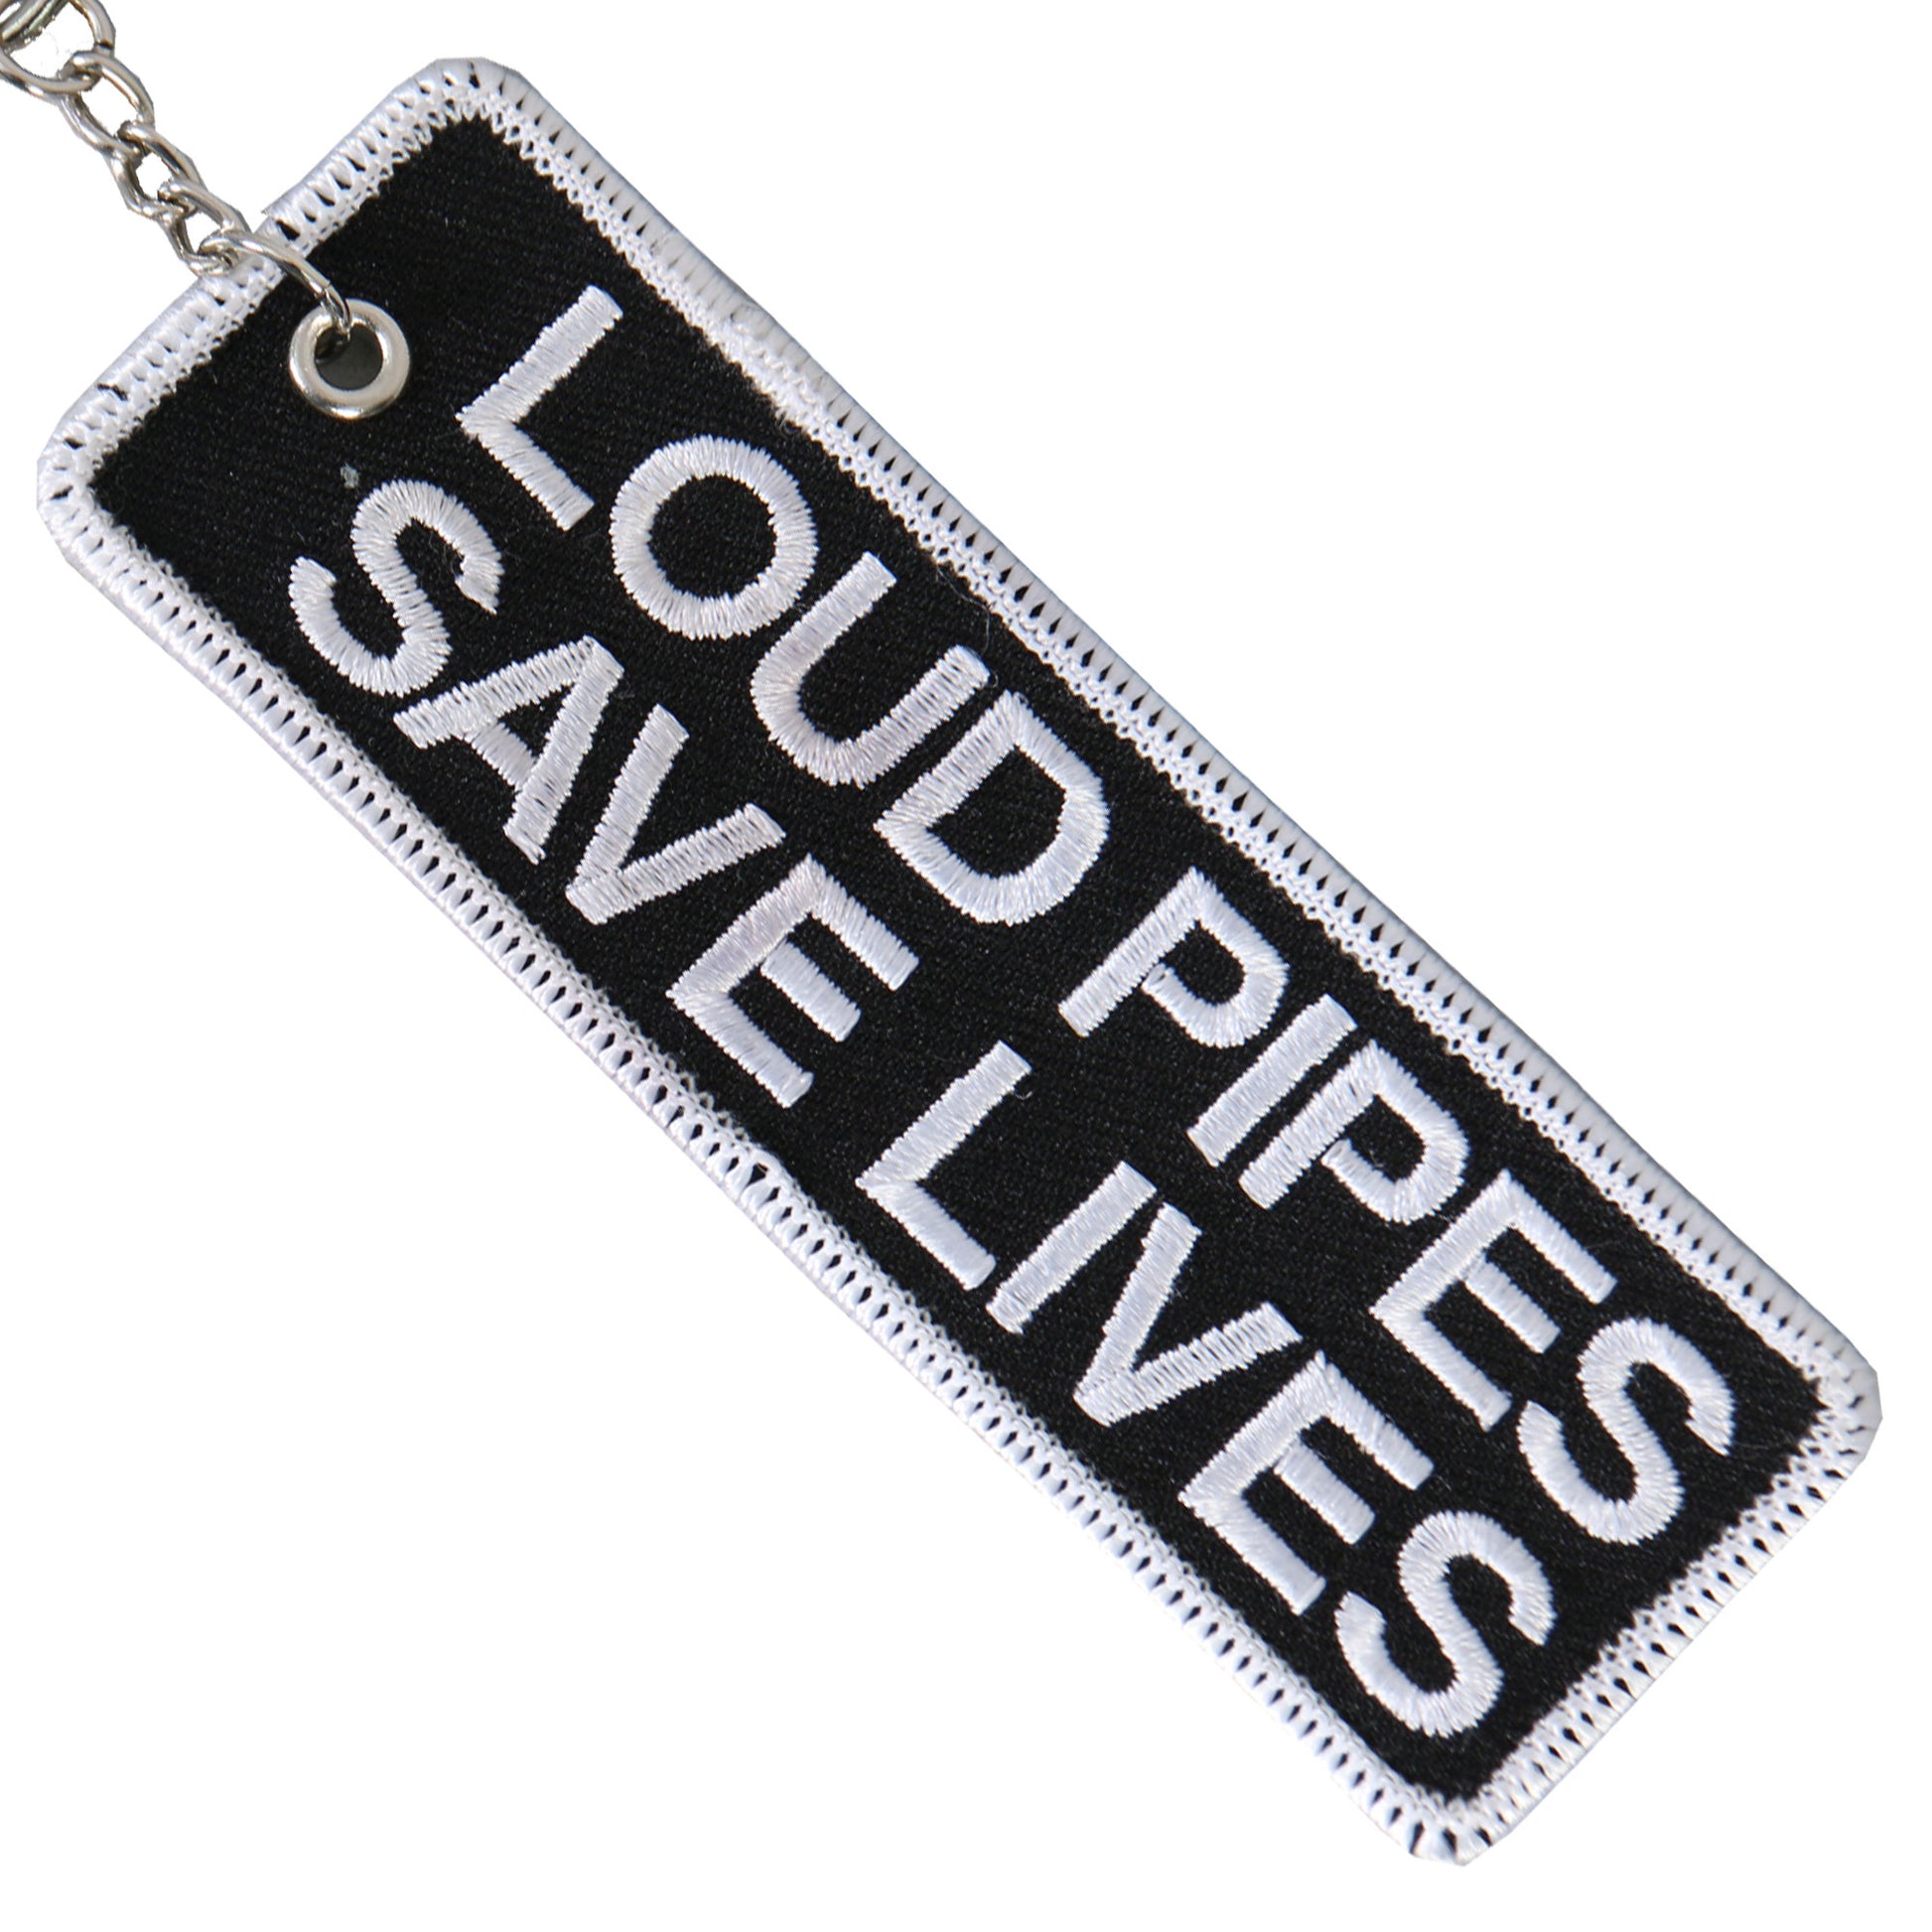 Hot Leathers KCH1001 Loud Pipes Save Lives Embroidered Key Chain